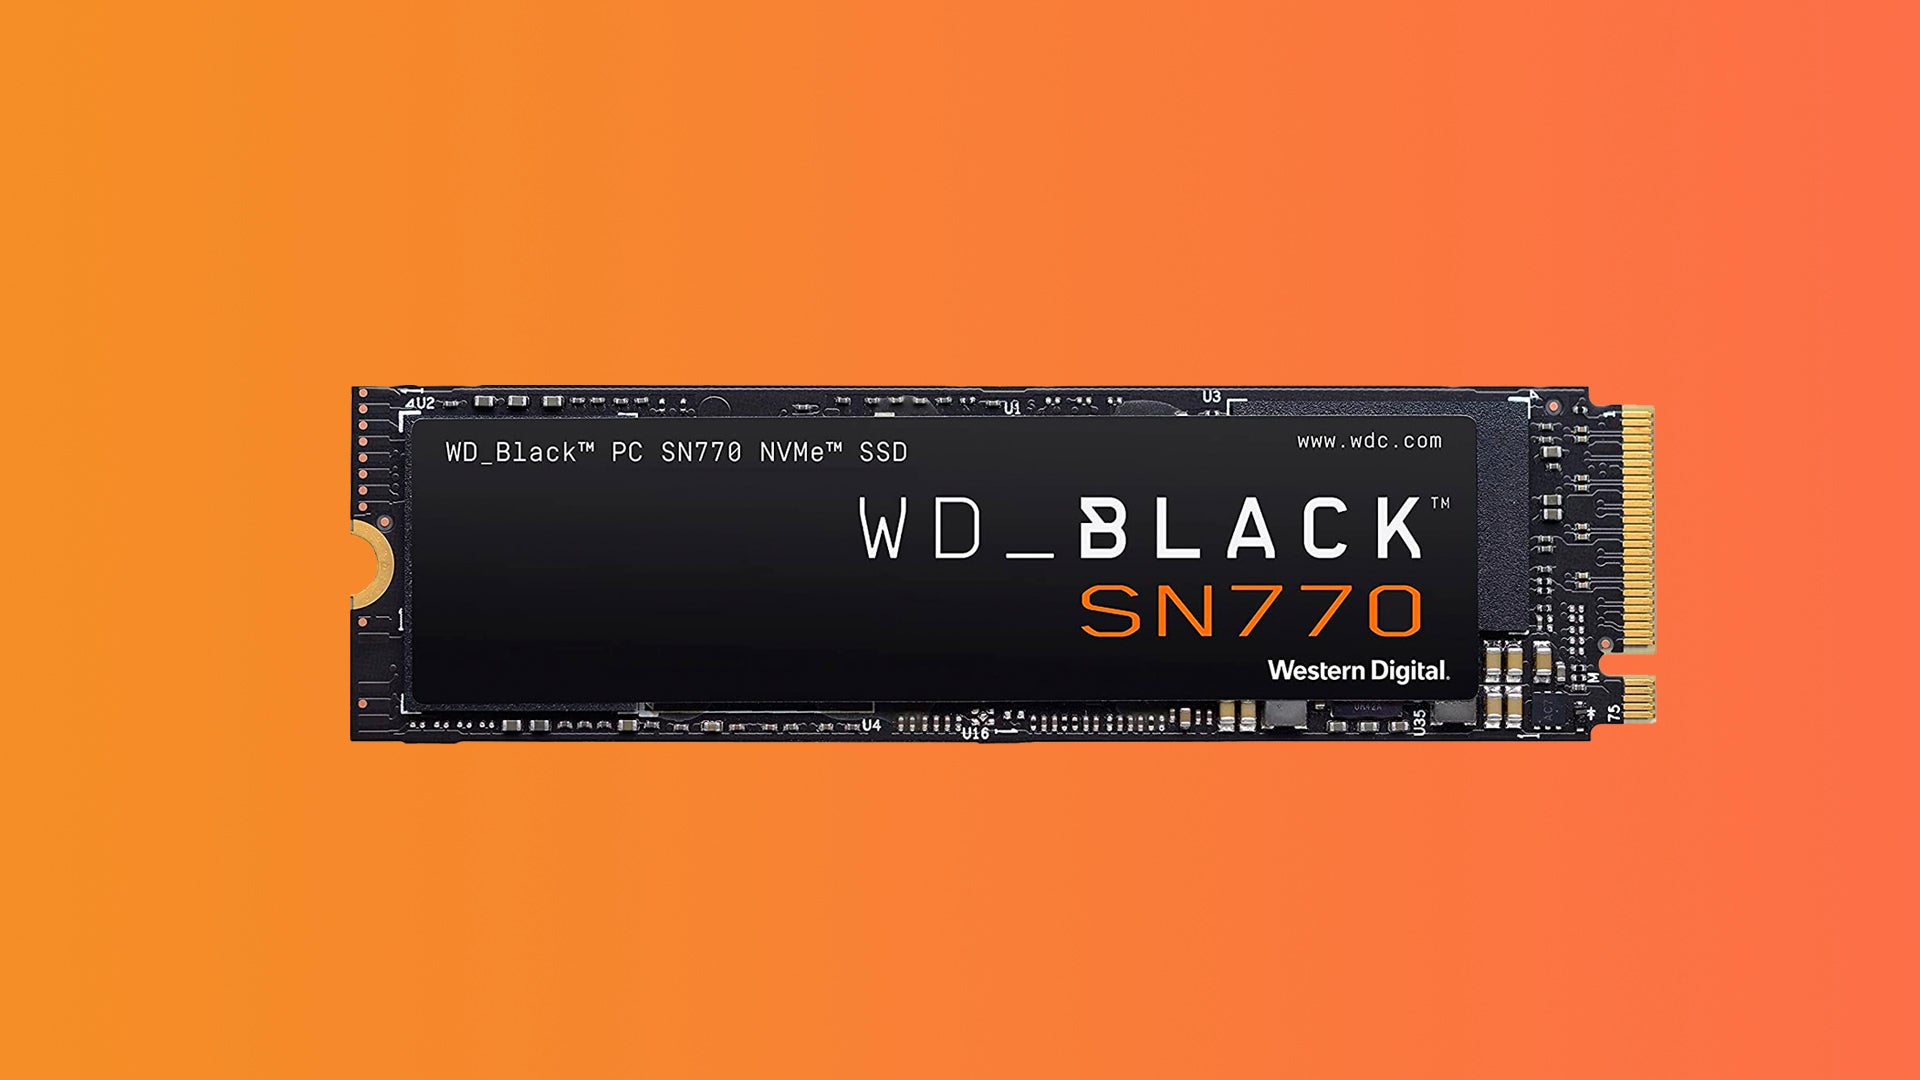 This 2TB WD Black SN770 NVMe SSD is just £87 from Amazon 